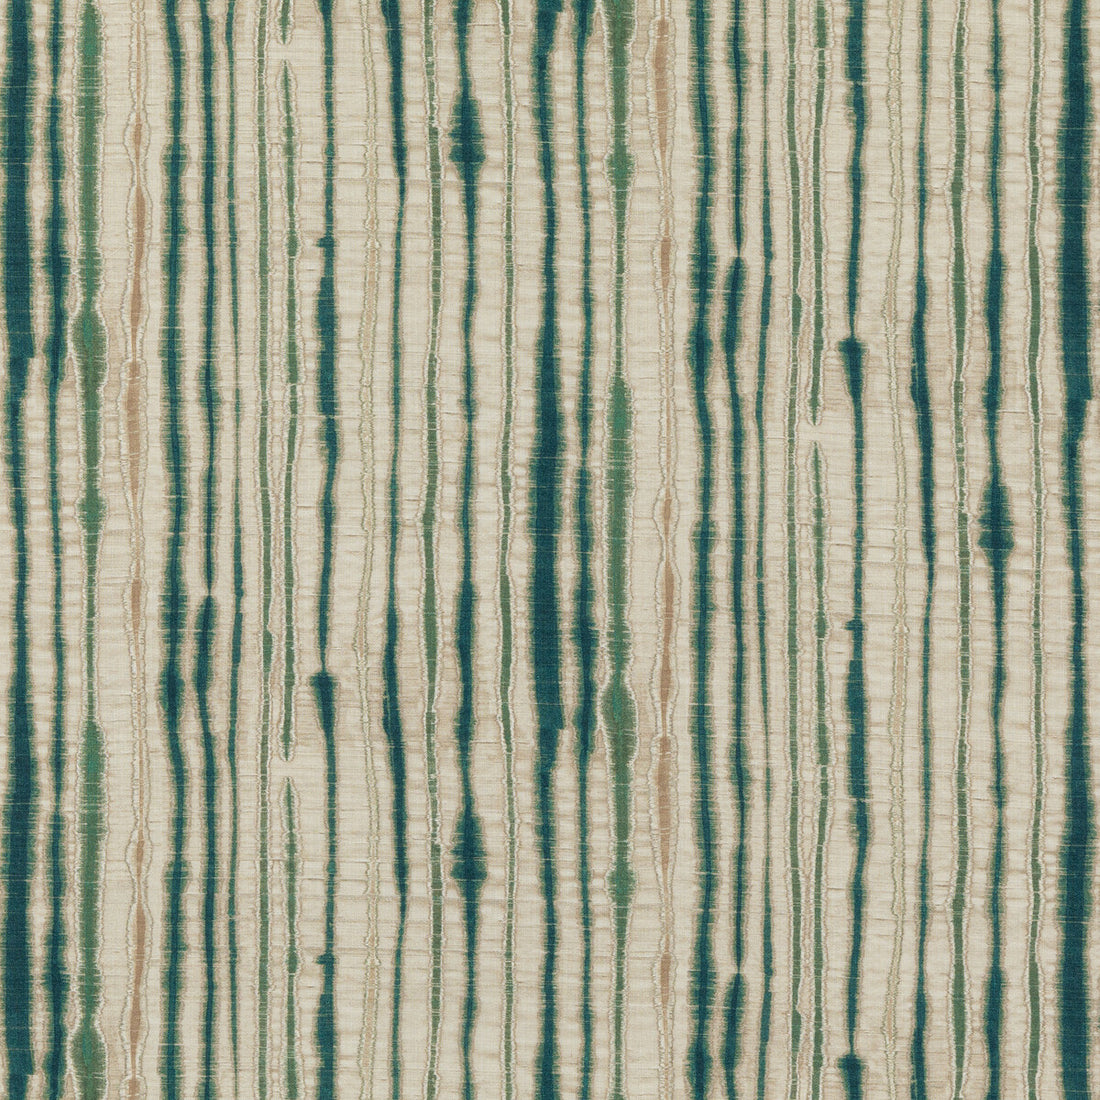 Linear fabric in teal color - pattern ED75038.4.0 - by Threads in the Nala Prints collection